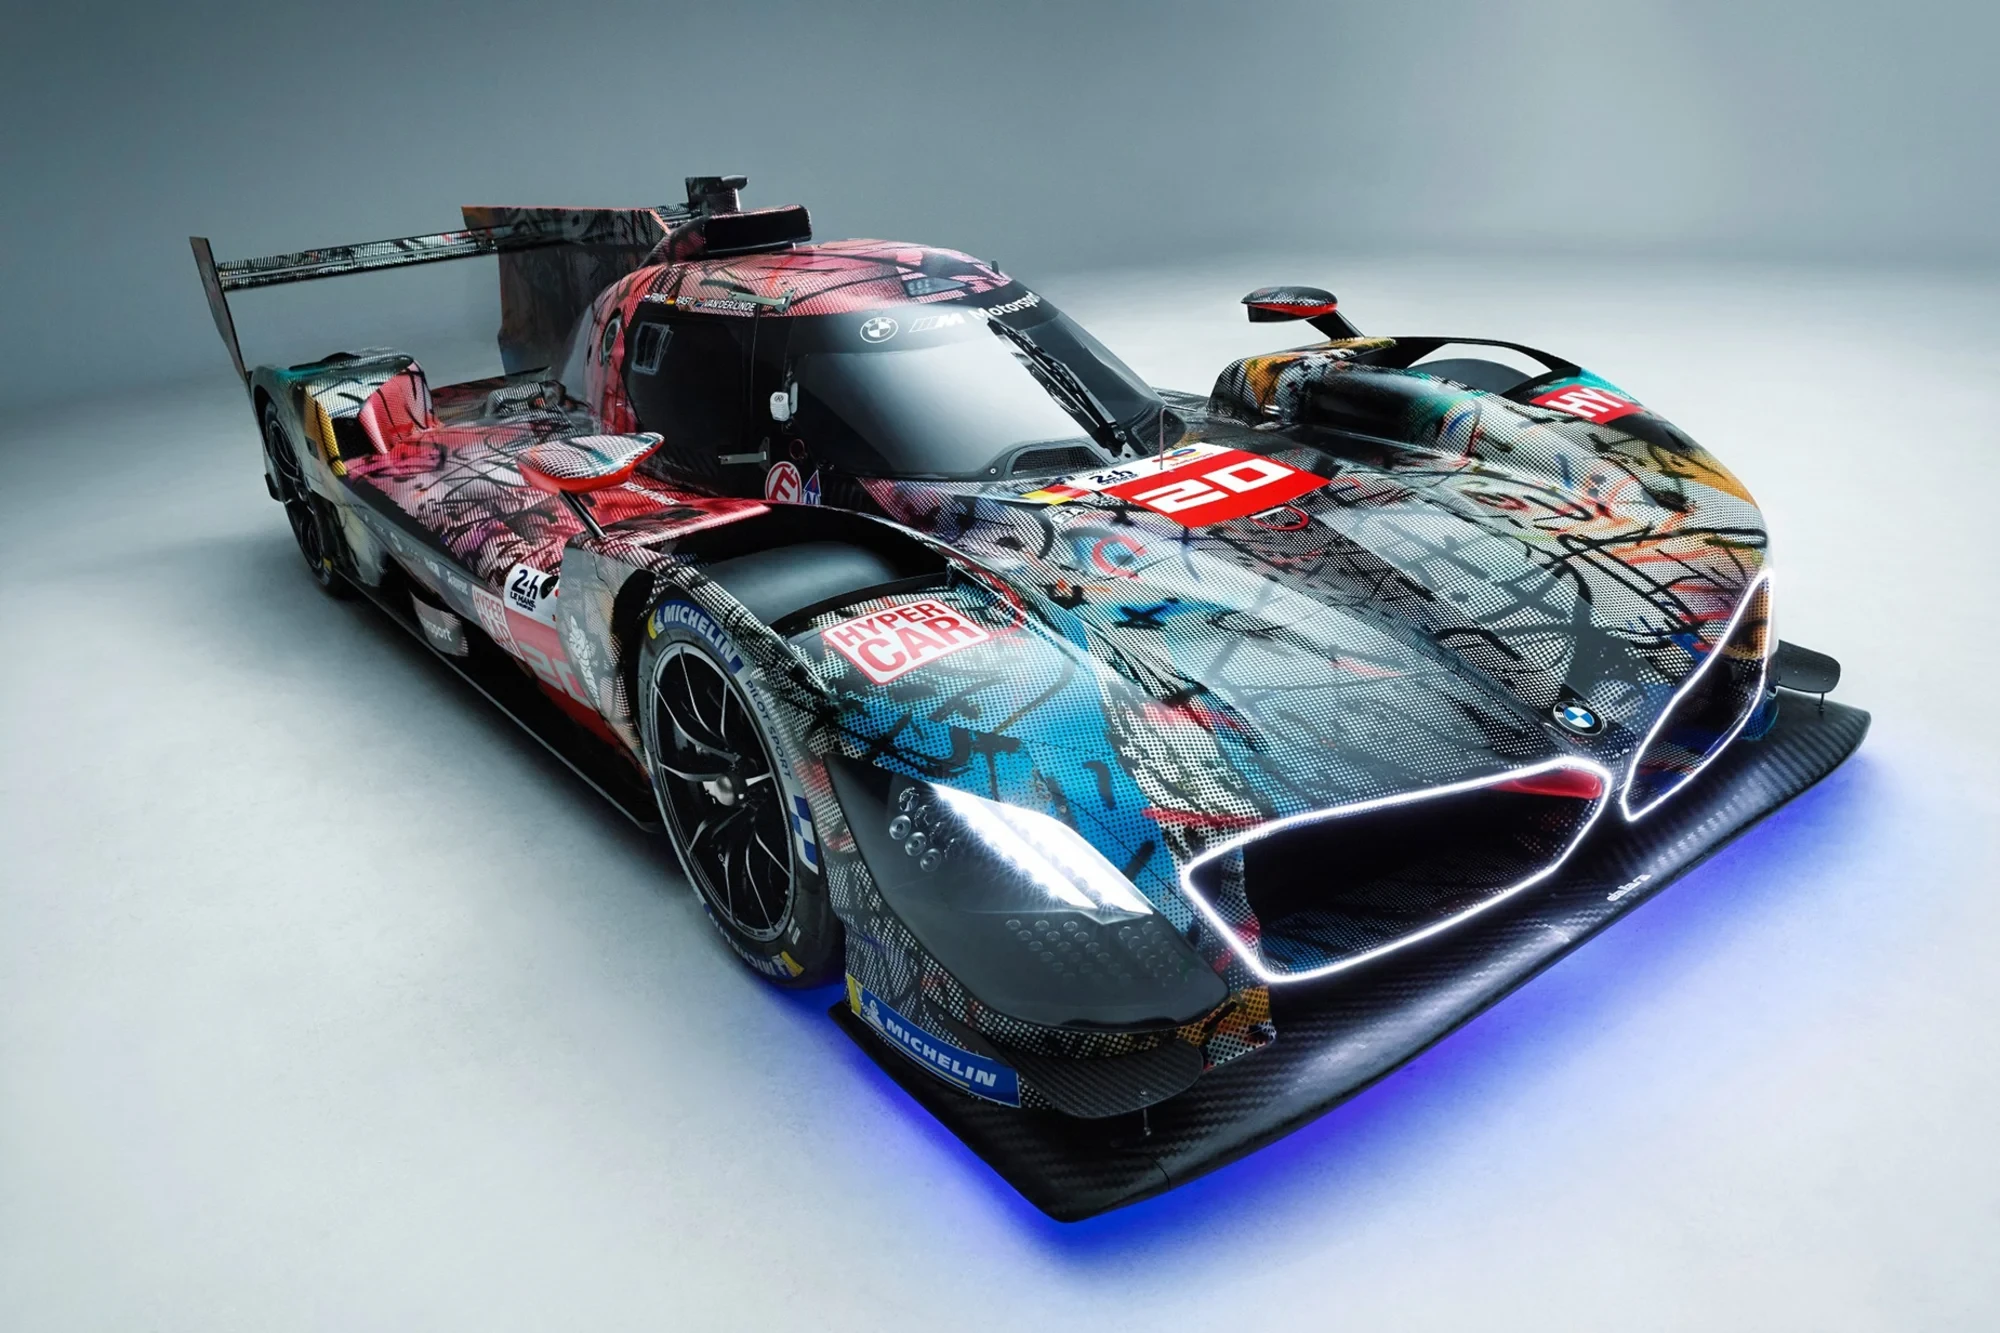 This BMW M Hybrid V8 Le Mans Racer is the Brand's 20th Art Car